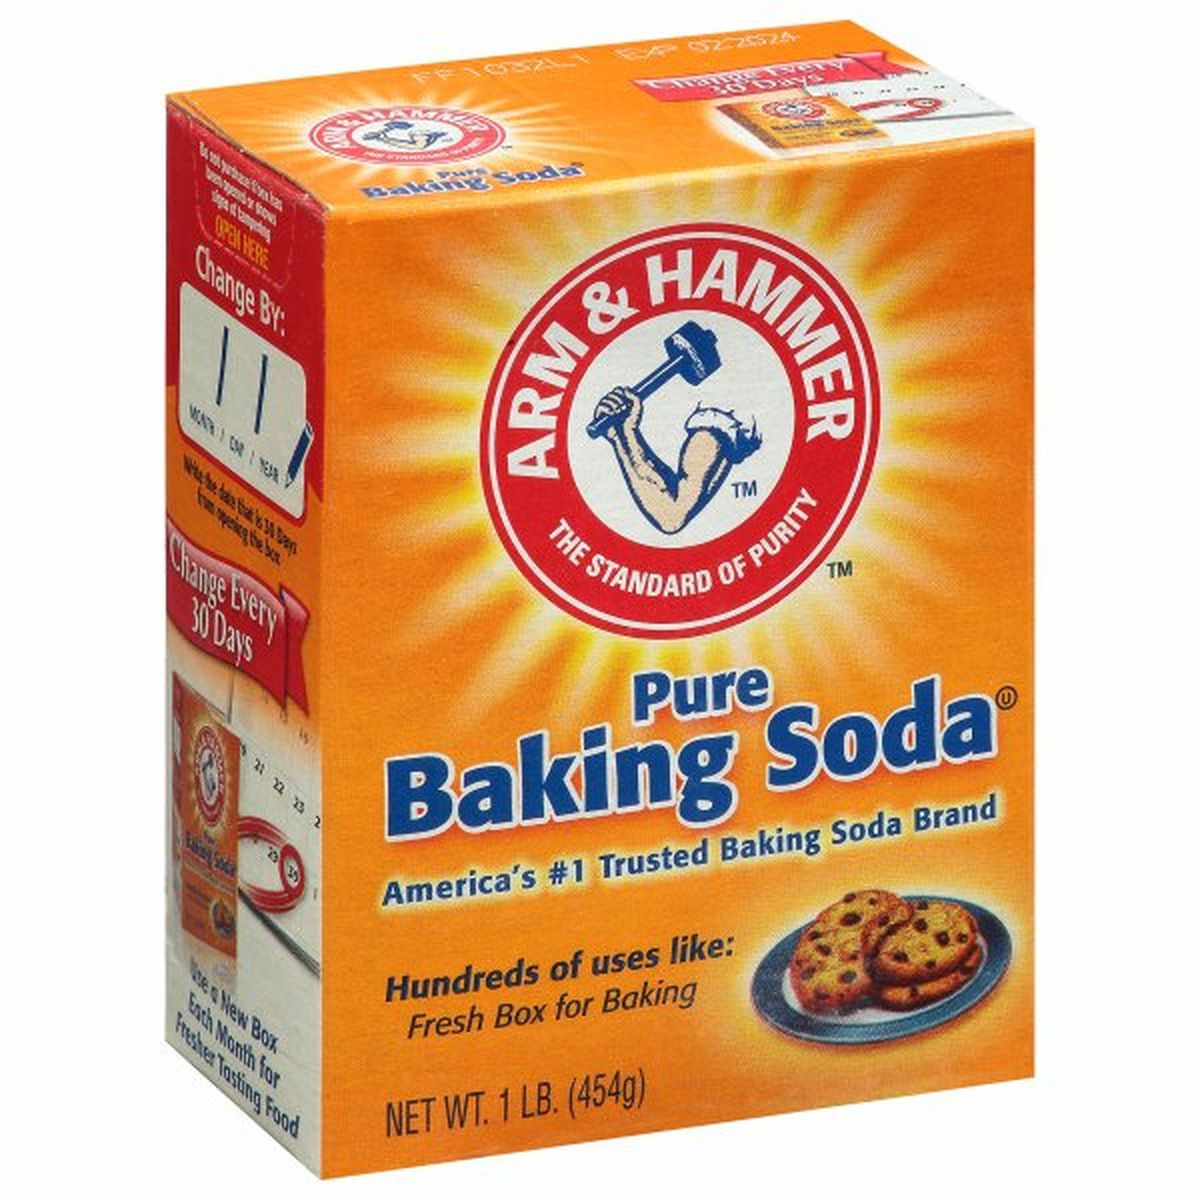 Calories in Arm & Hammer Baking Soda, Pure